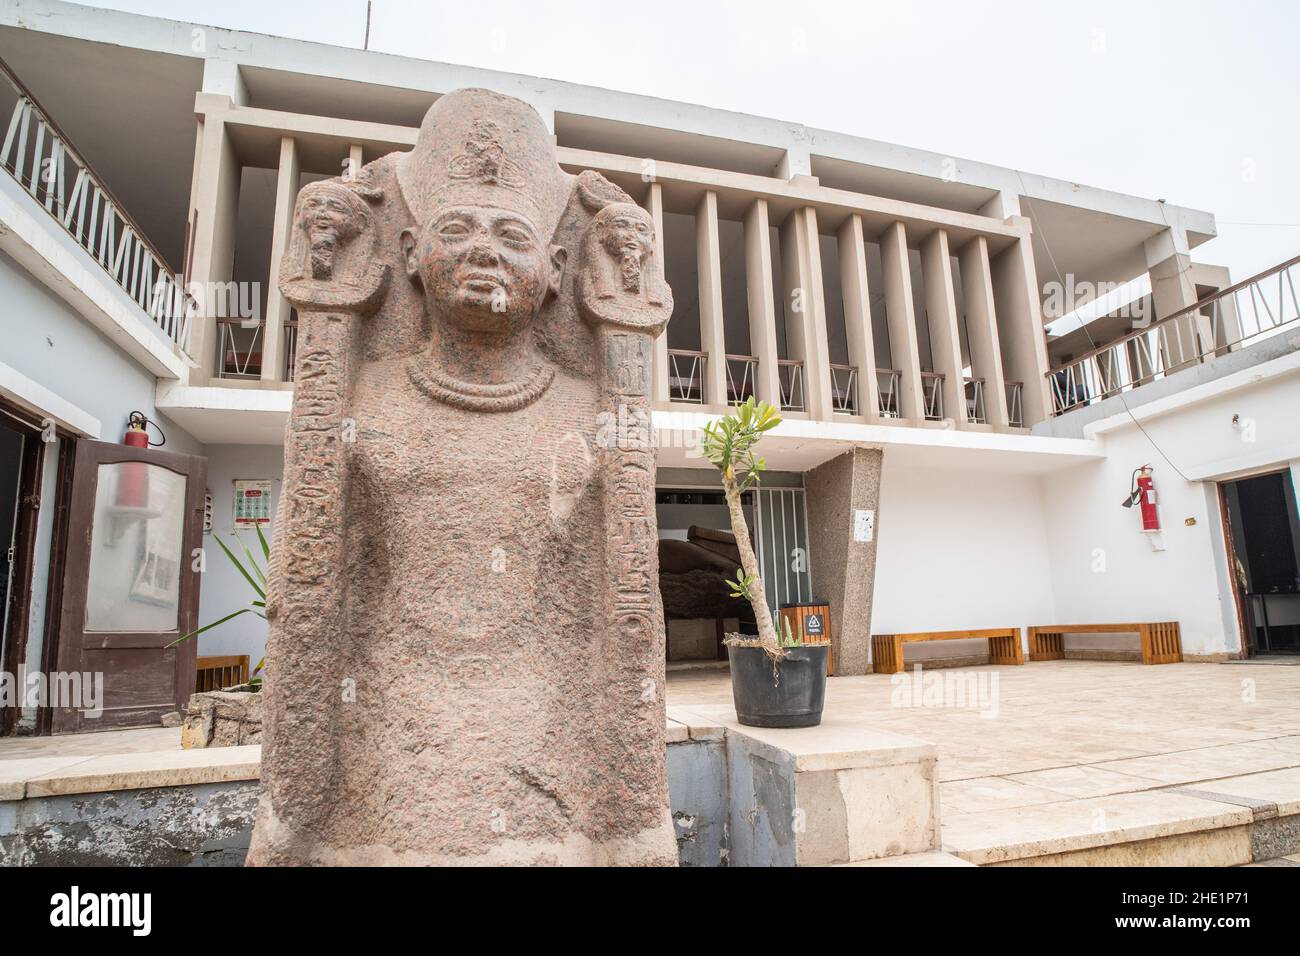 A statue at the open air museum at Memphis, Egypt, the building behind houses the giant broken statue of Ramses II. Stock Photo